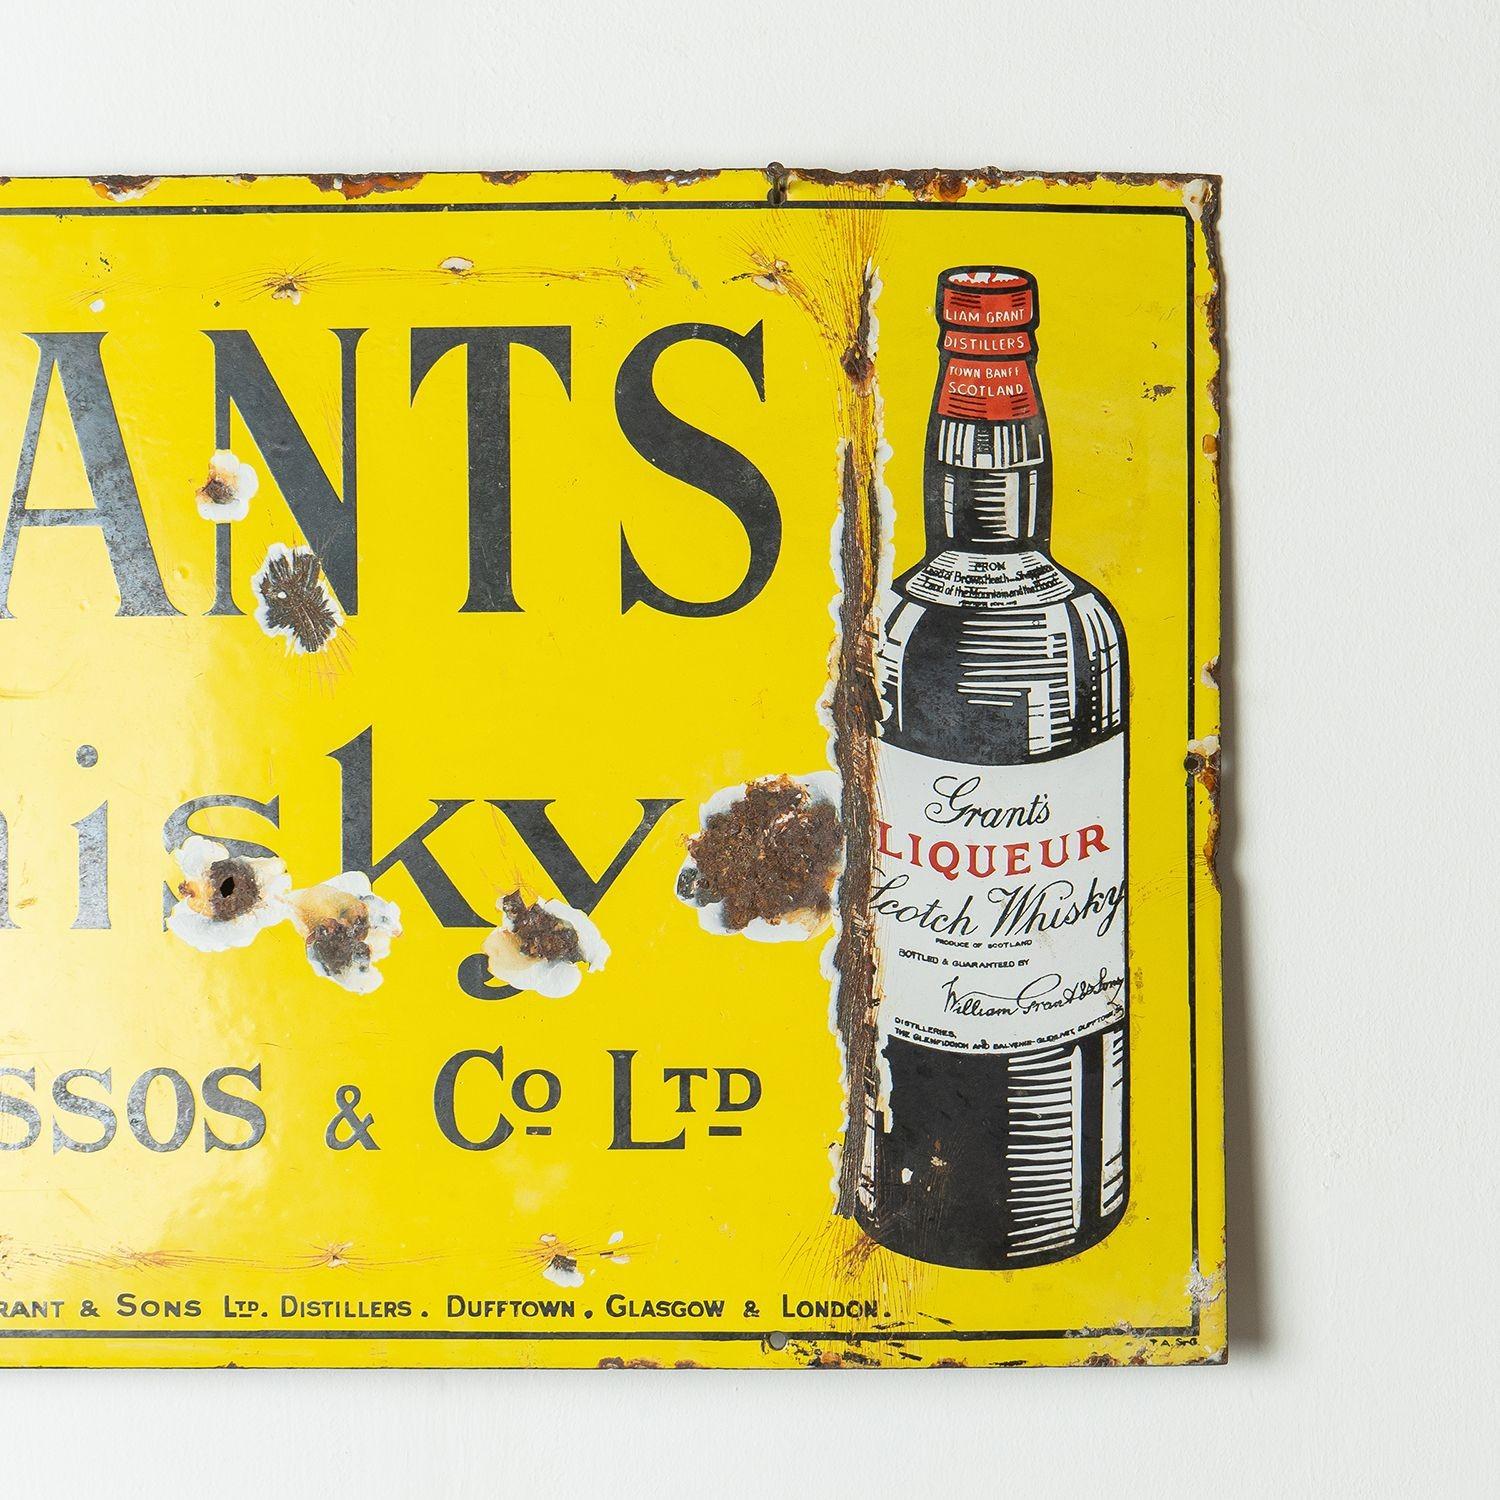 Antique Scottish Sign
Advertising ‘Grants Whisky, Agents Drossos & Co. Ltd. Proprietors William Grant & Son Ltd. Distilleries Dufftown, Glasgow and London.’
Alongside a pictorial image of a bottle of their blended Scotch whisky on a bright yellow